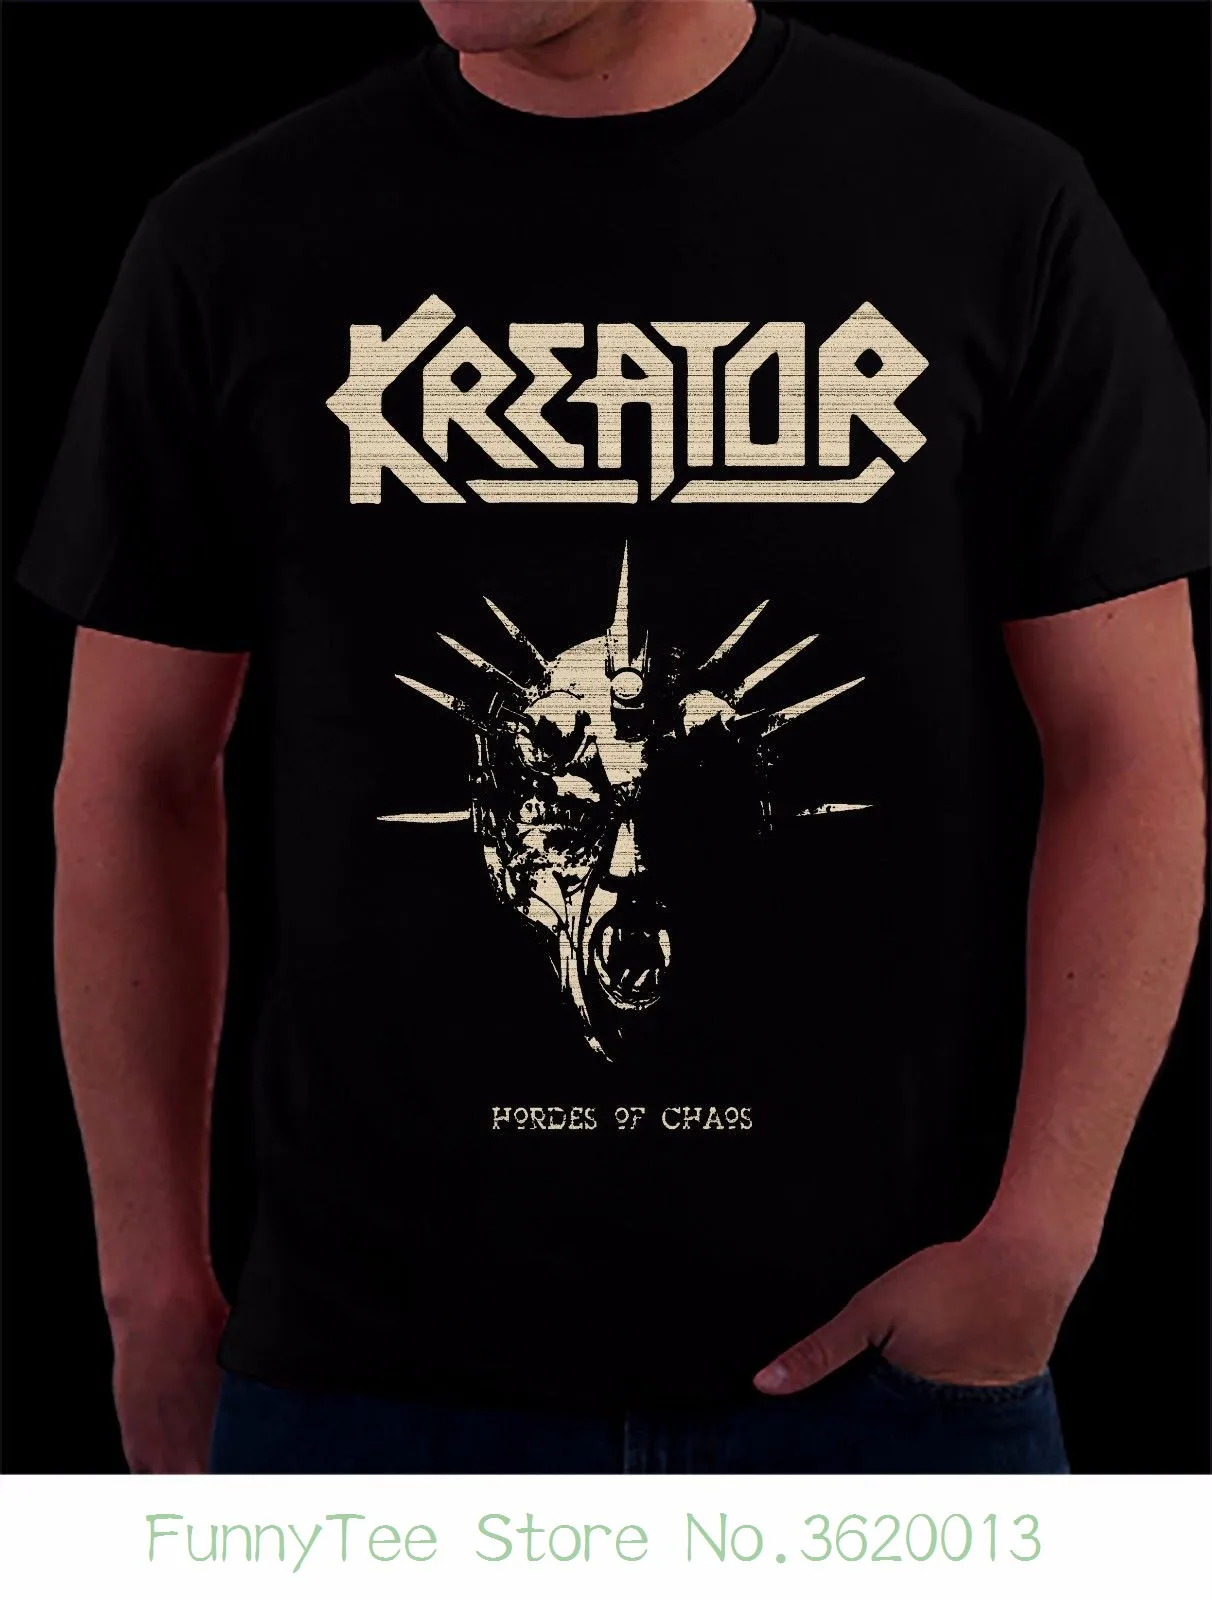 Men's Shirts  Tops NEW T-SHIRT MEN'S-DTG PRINTED TEE SIZE-S/7XL KREATOR  Extreme Aggression Men's T-Shirts